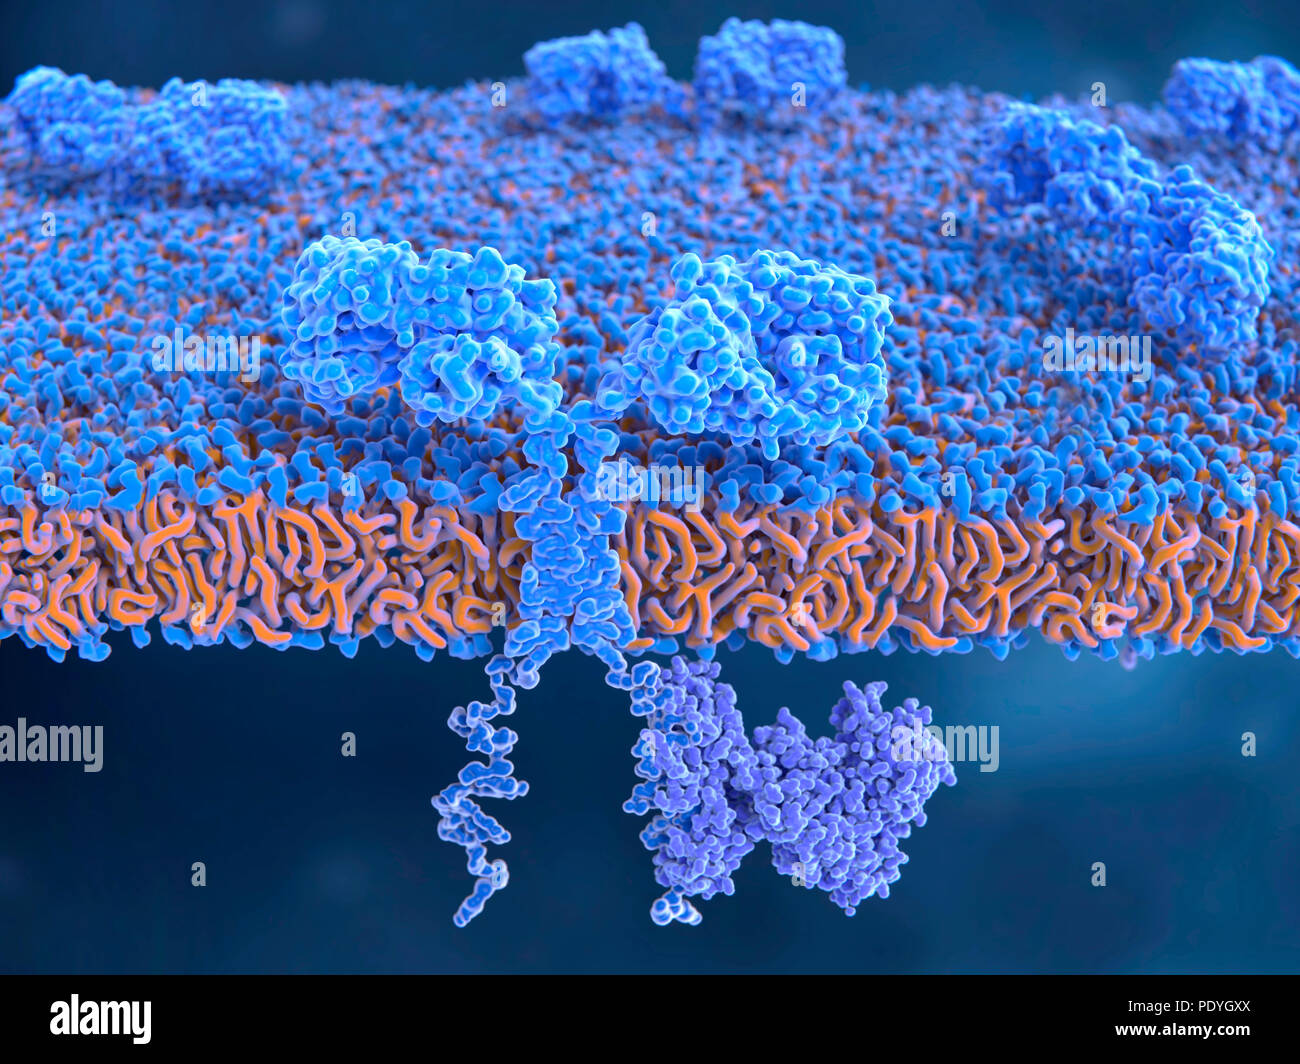 Chimeric antigen receptor (CAR) on T-cell, illustration. The CAR structures are blue, with the cutaway foreground showing one spanning the cell membrane. These CARs are on the surface of an engineered T-cell. CARs are engineered cell receptors that allow T cells to recognize and attack cancer cells in a specific way. They are built by connecting several functional parts from different proteins. This receptor has a signal protein (ZAP70, purple, lower right) attached to the intracellular domain (bottom). Stock Photo